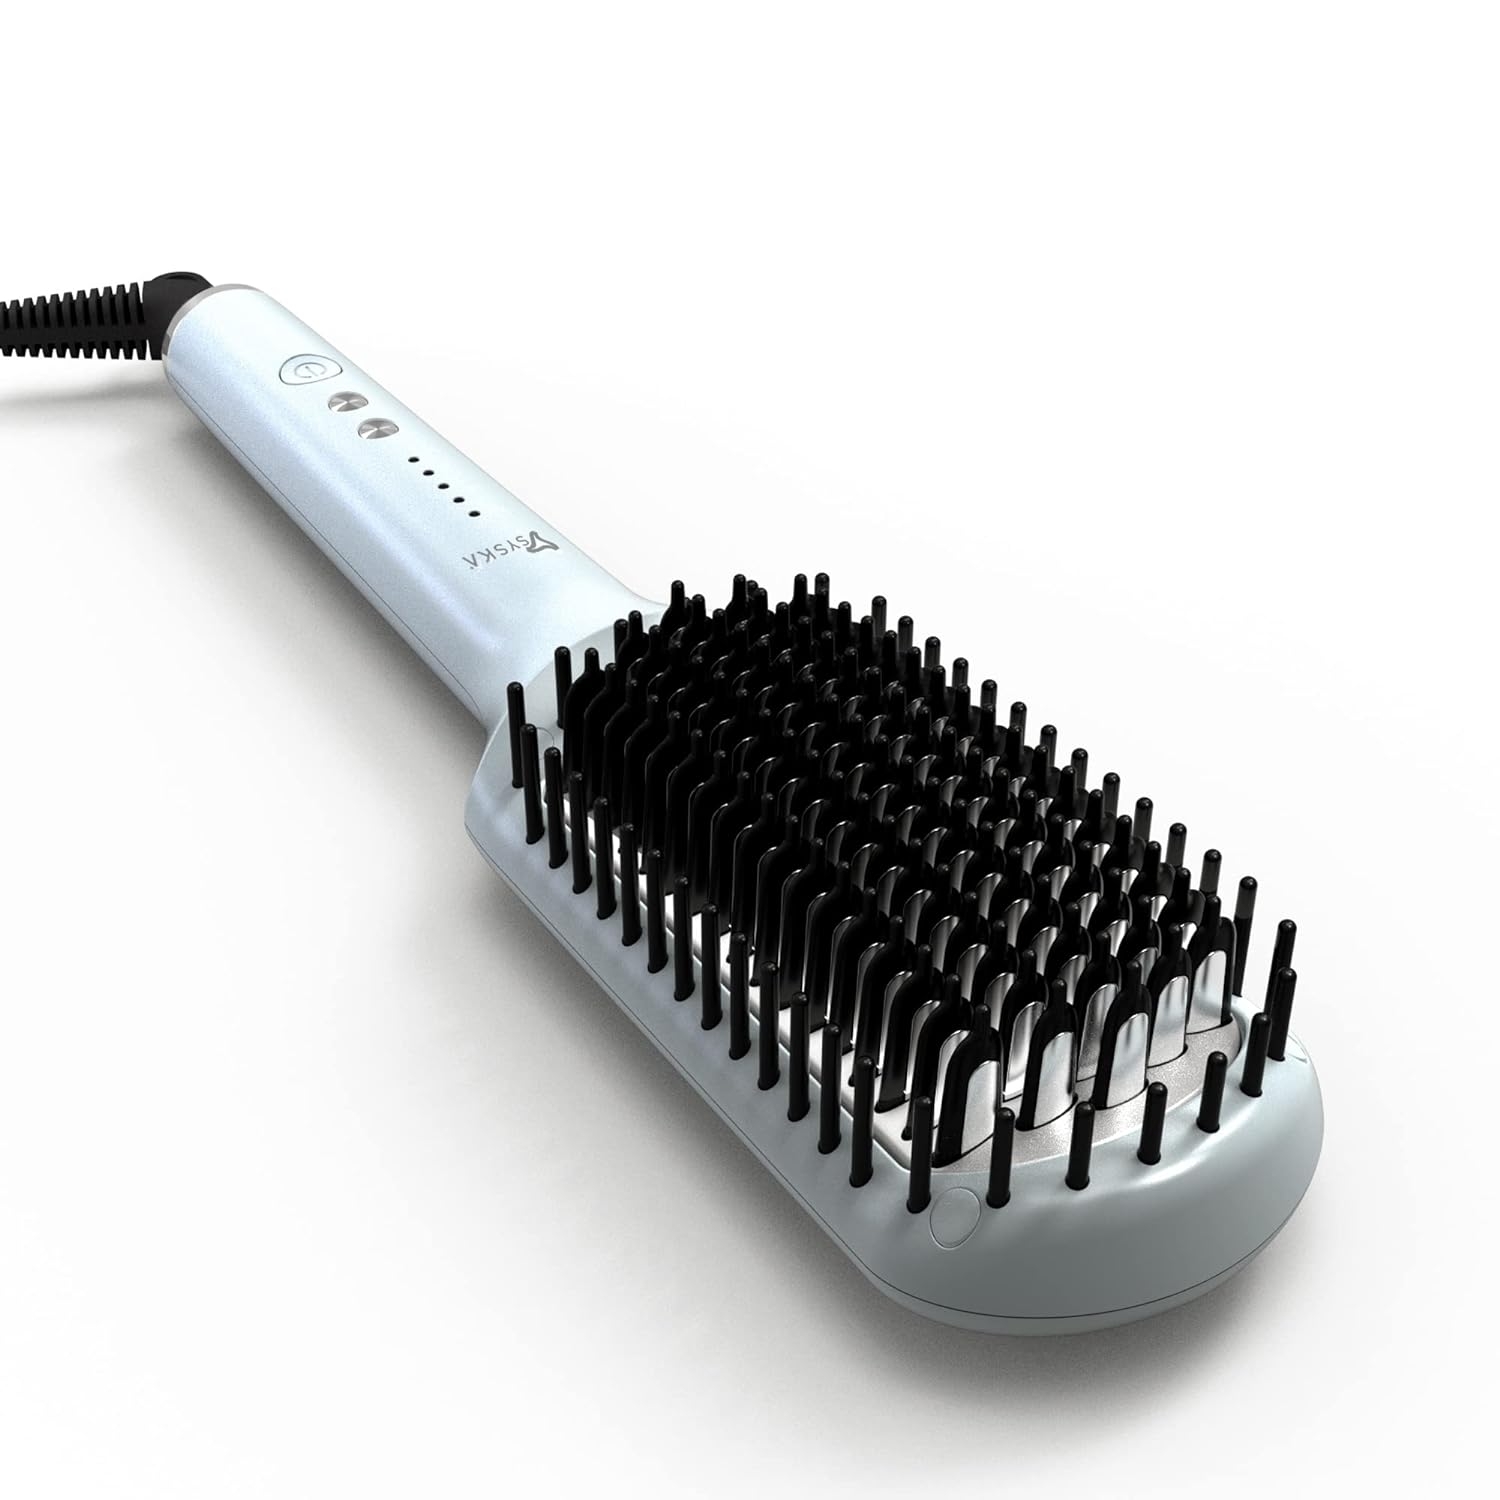 Syska HBS300 Salon Finish Hair Straightening Brush with Ceramic Coated Heating Plate | 4 Temperature Settings for women